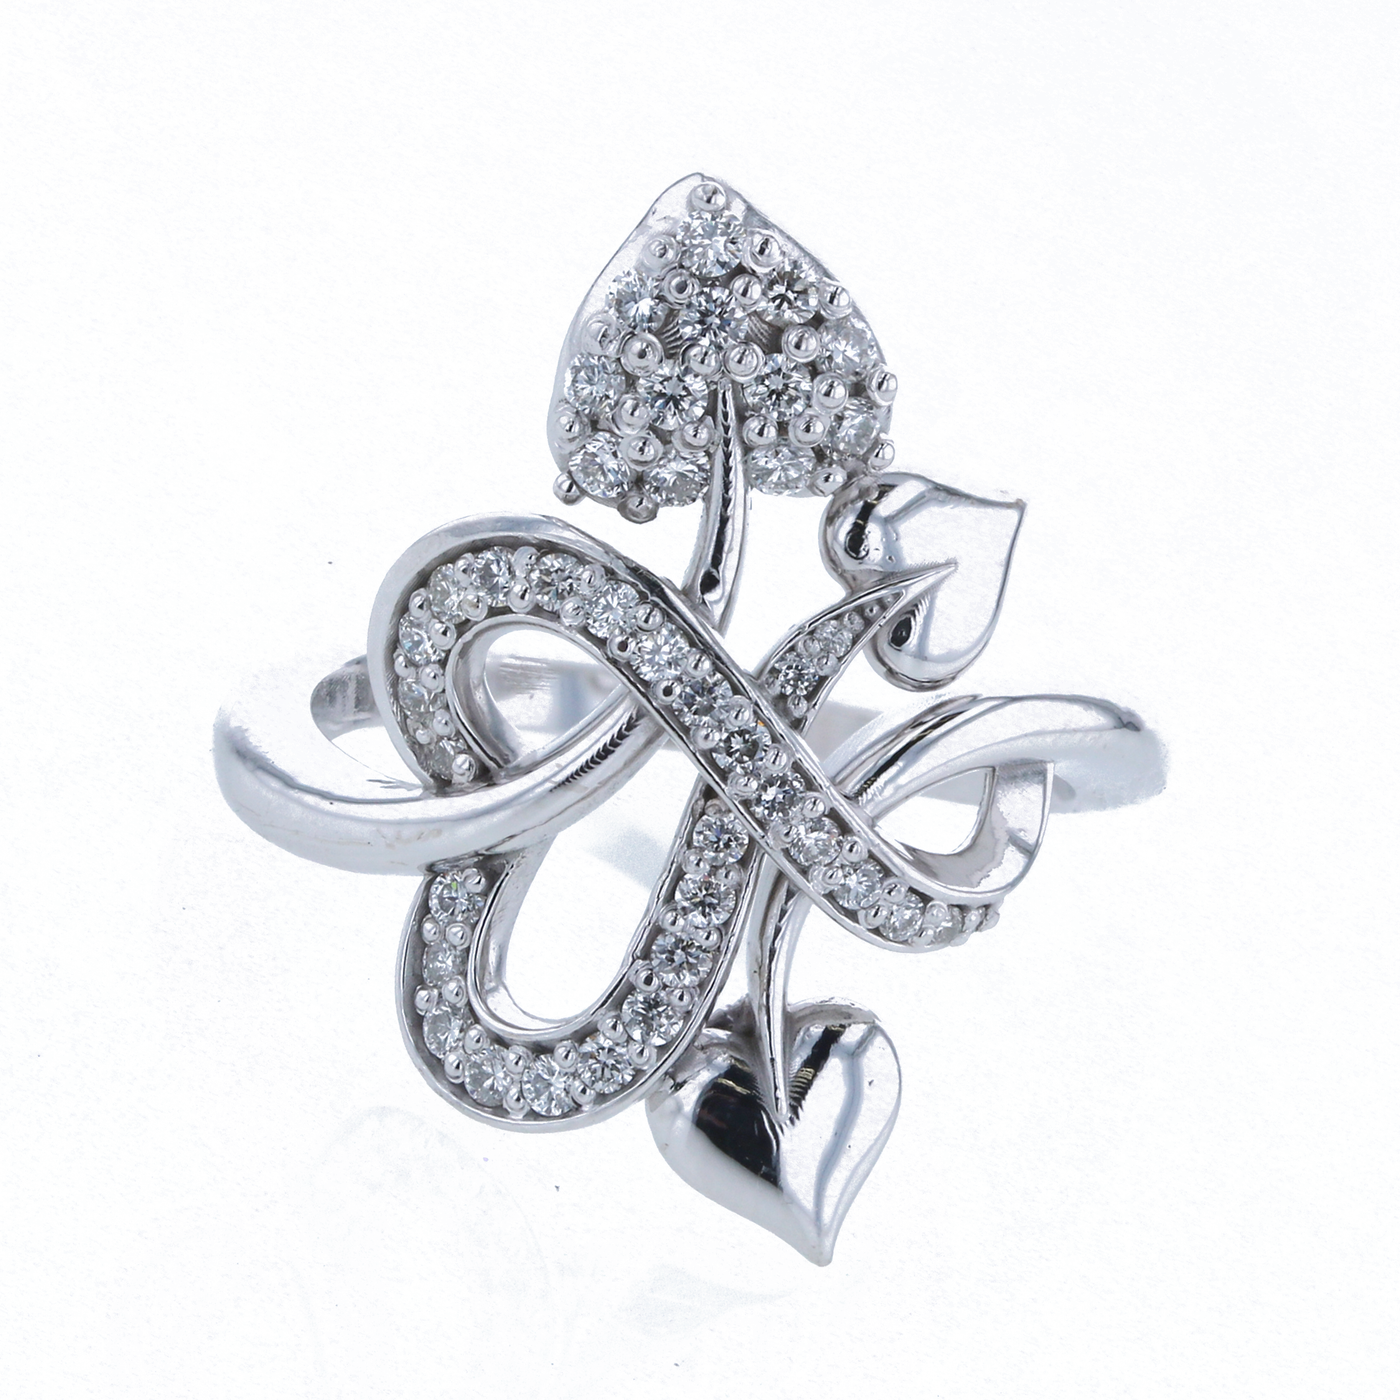 "Hearts Intertwined" 0.45 CTTW Diamond Ring in 14K White Gold